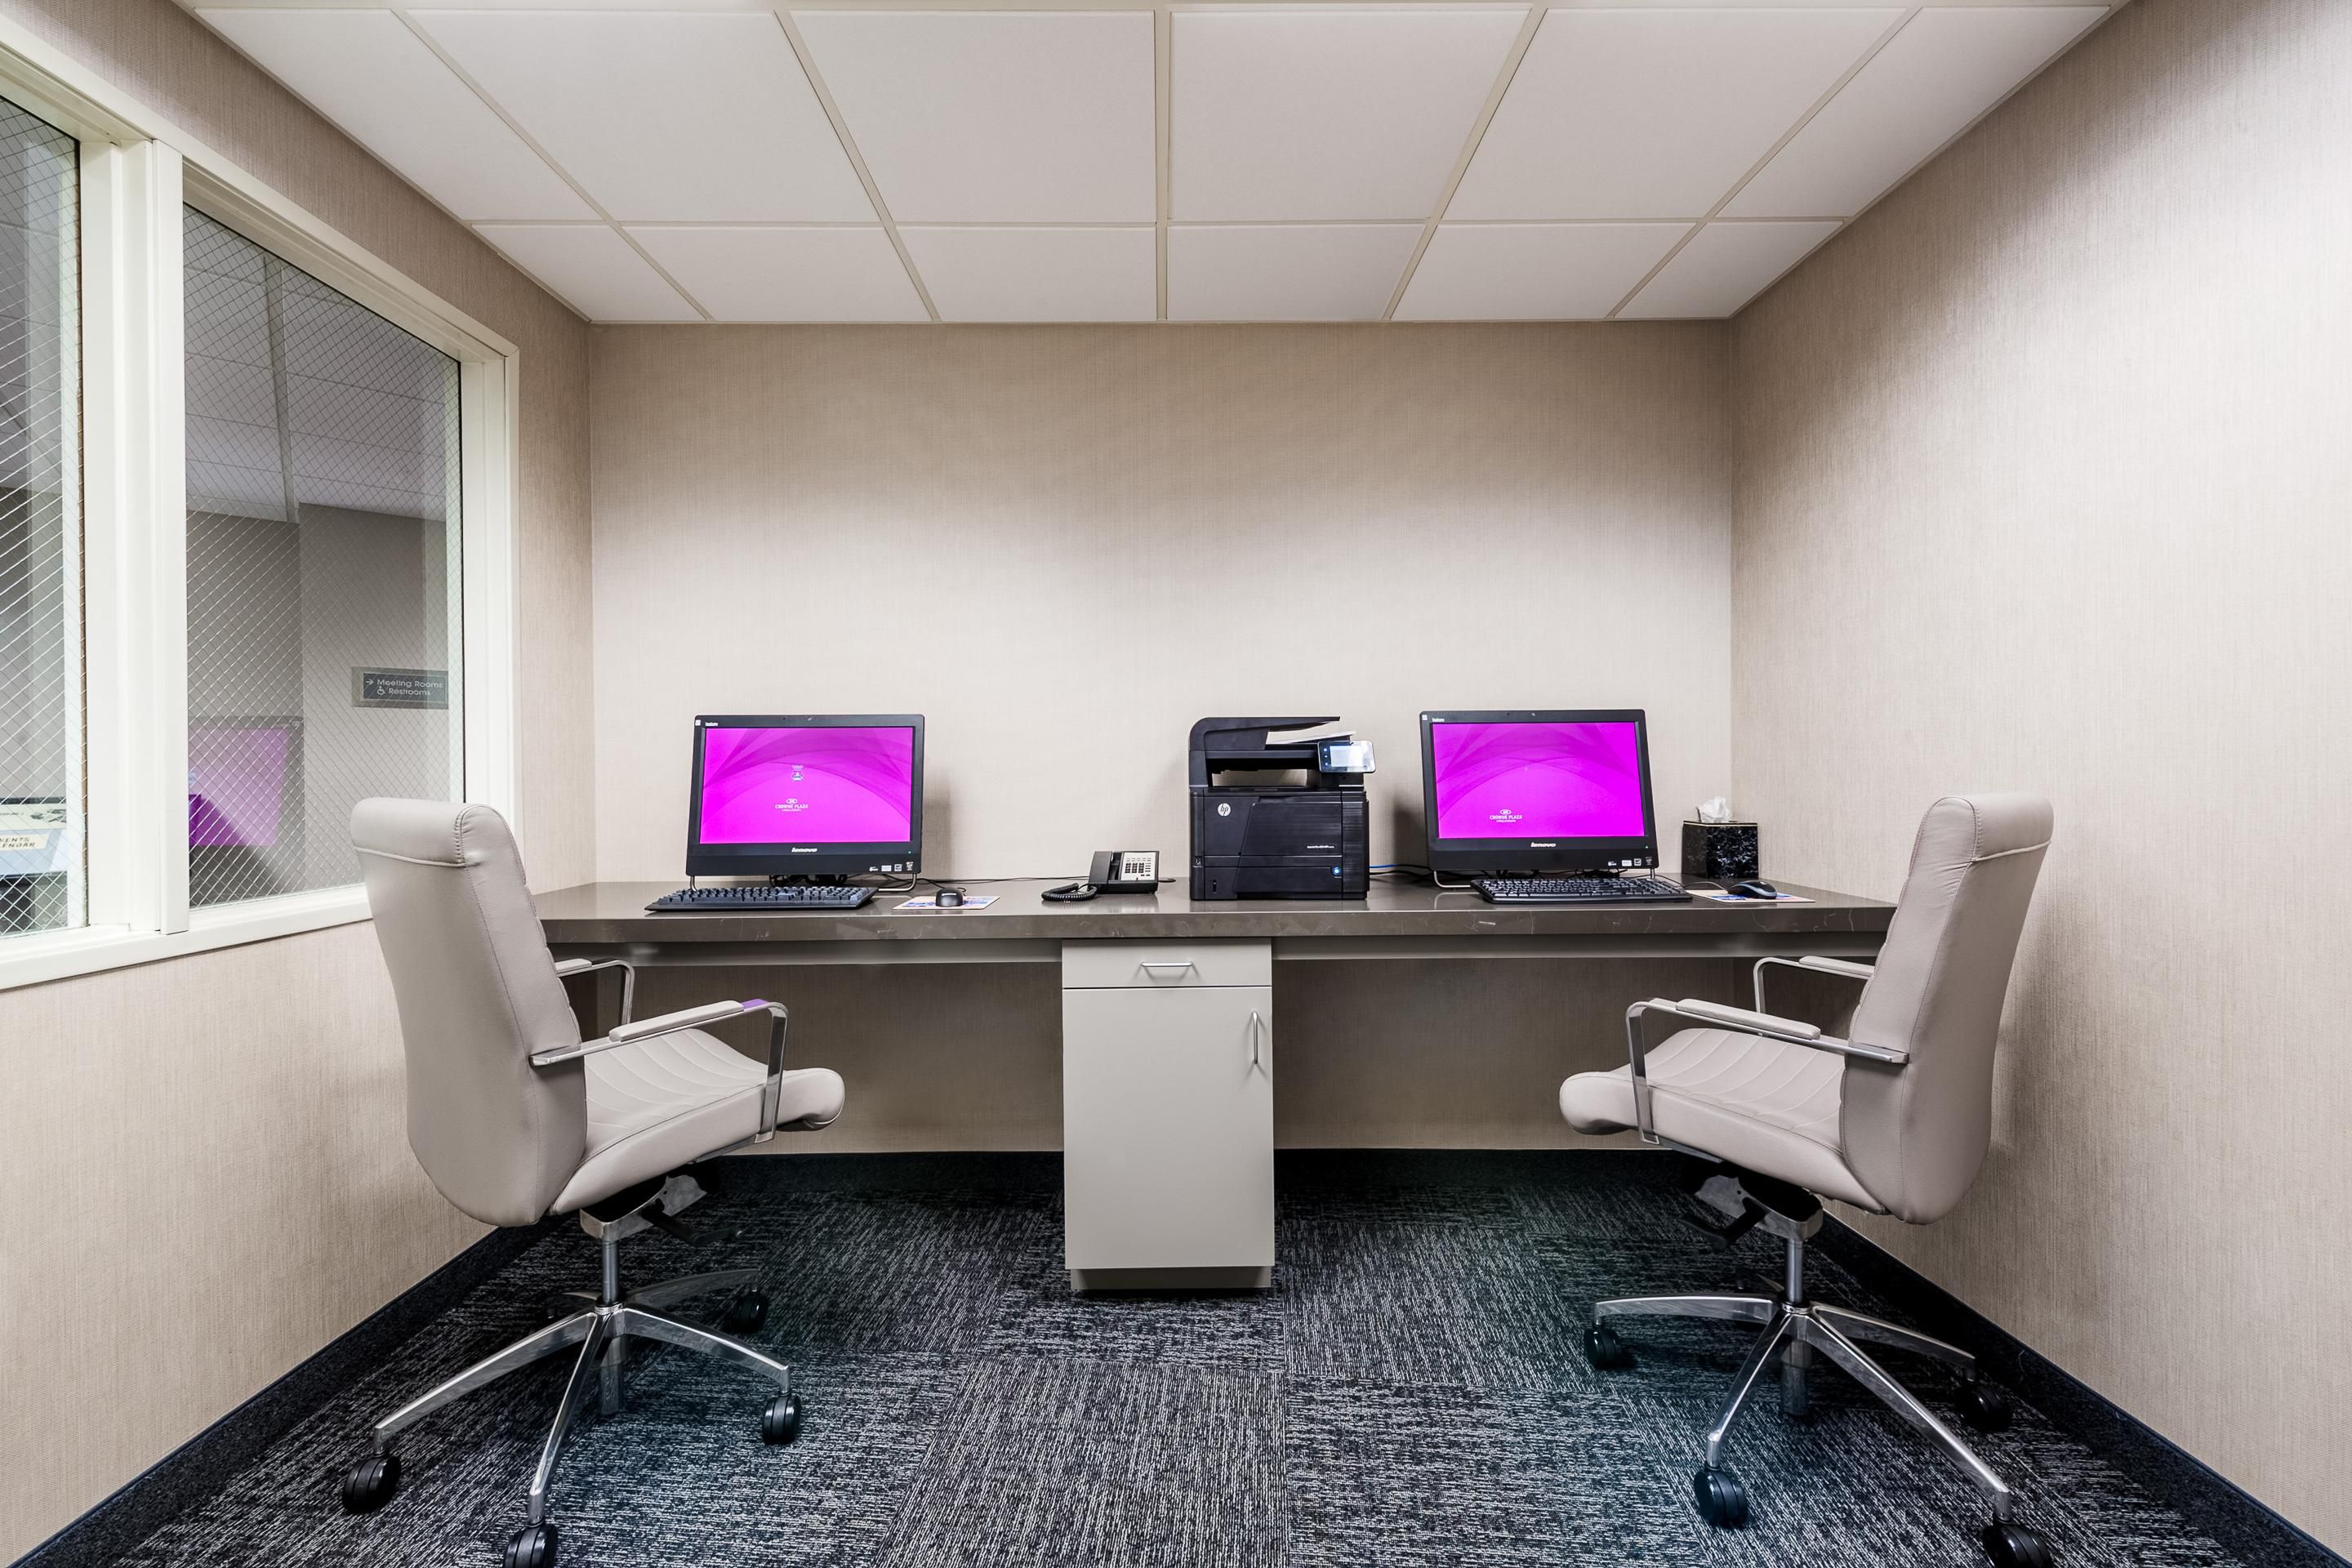 Complimentary internet, printing capabilities &amp; privacy to work